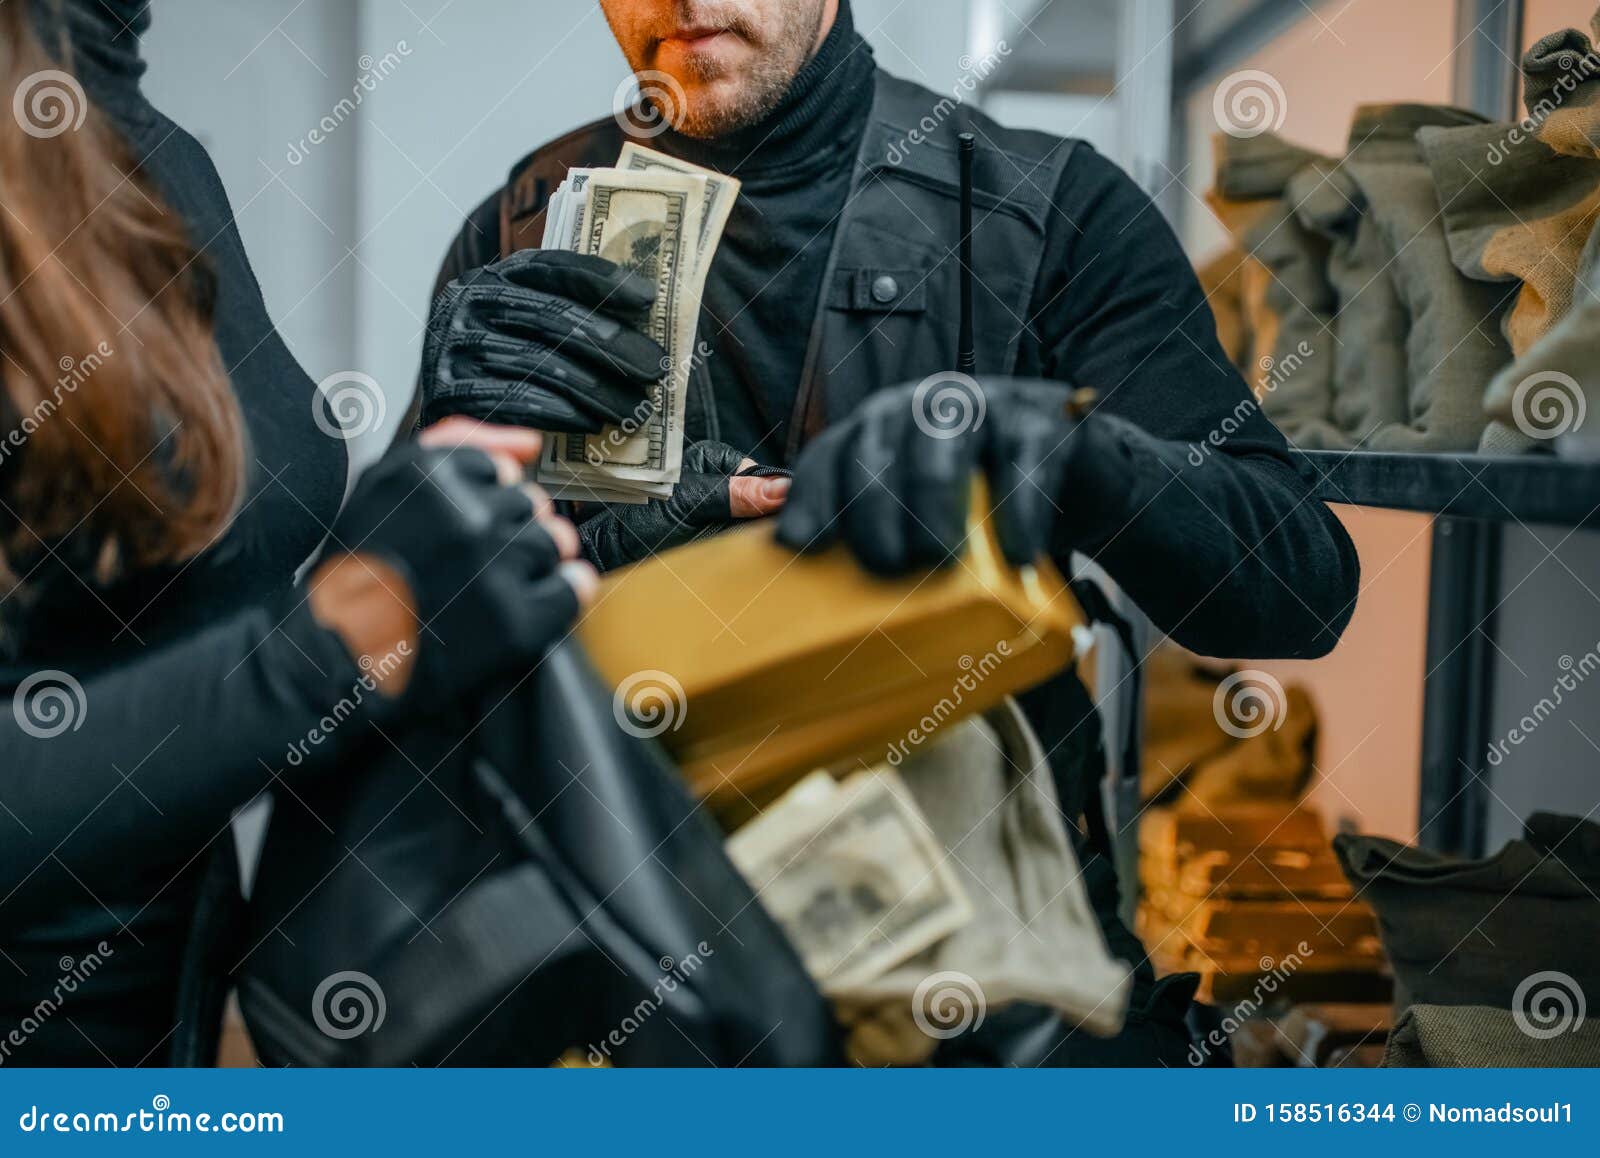 Bank Robbery of the Century, Robbers Hacked Vault Stock Photo Image